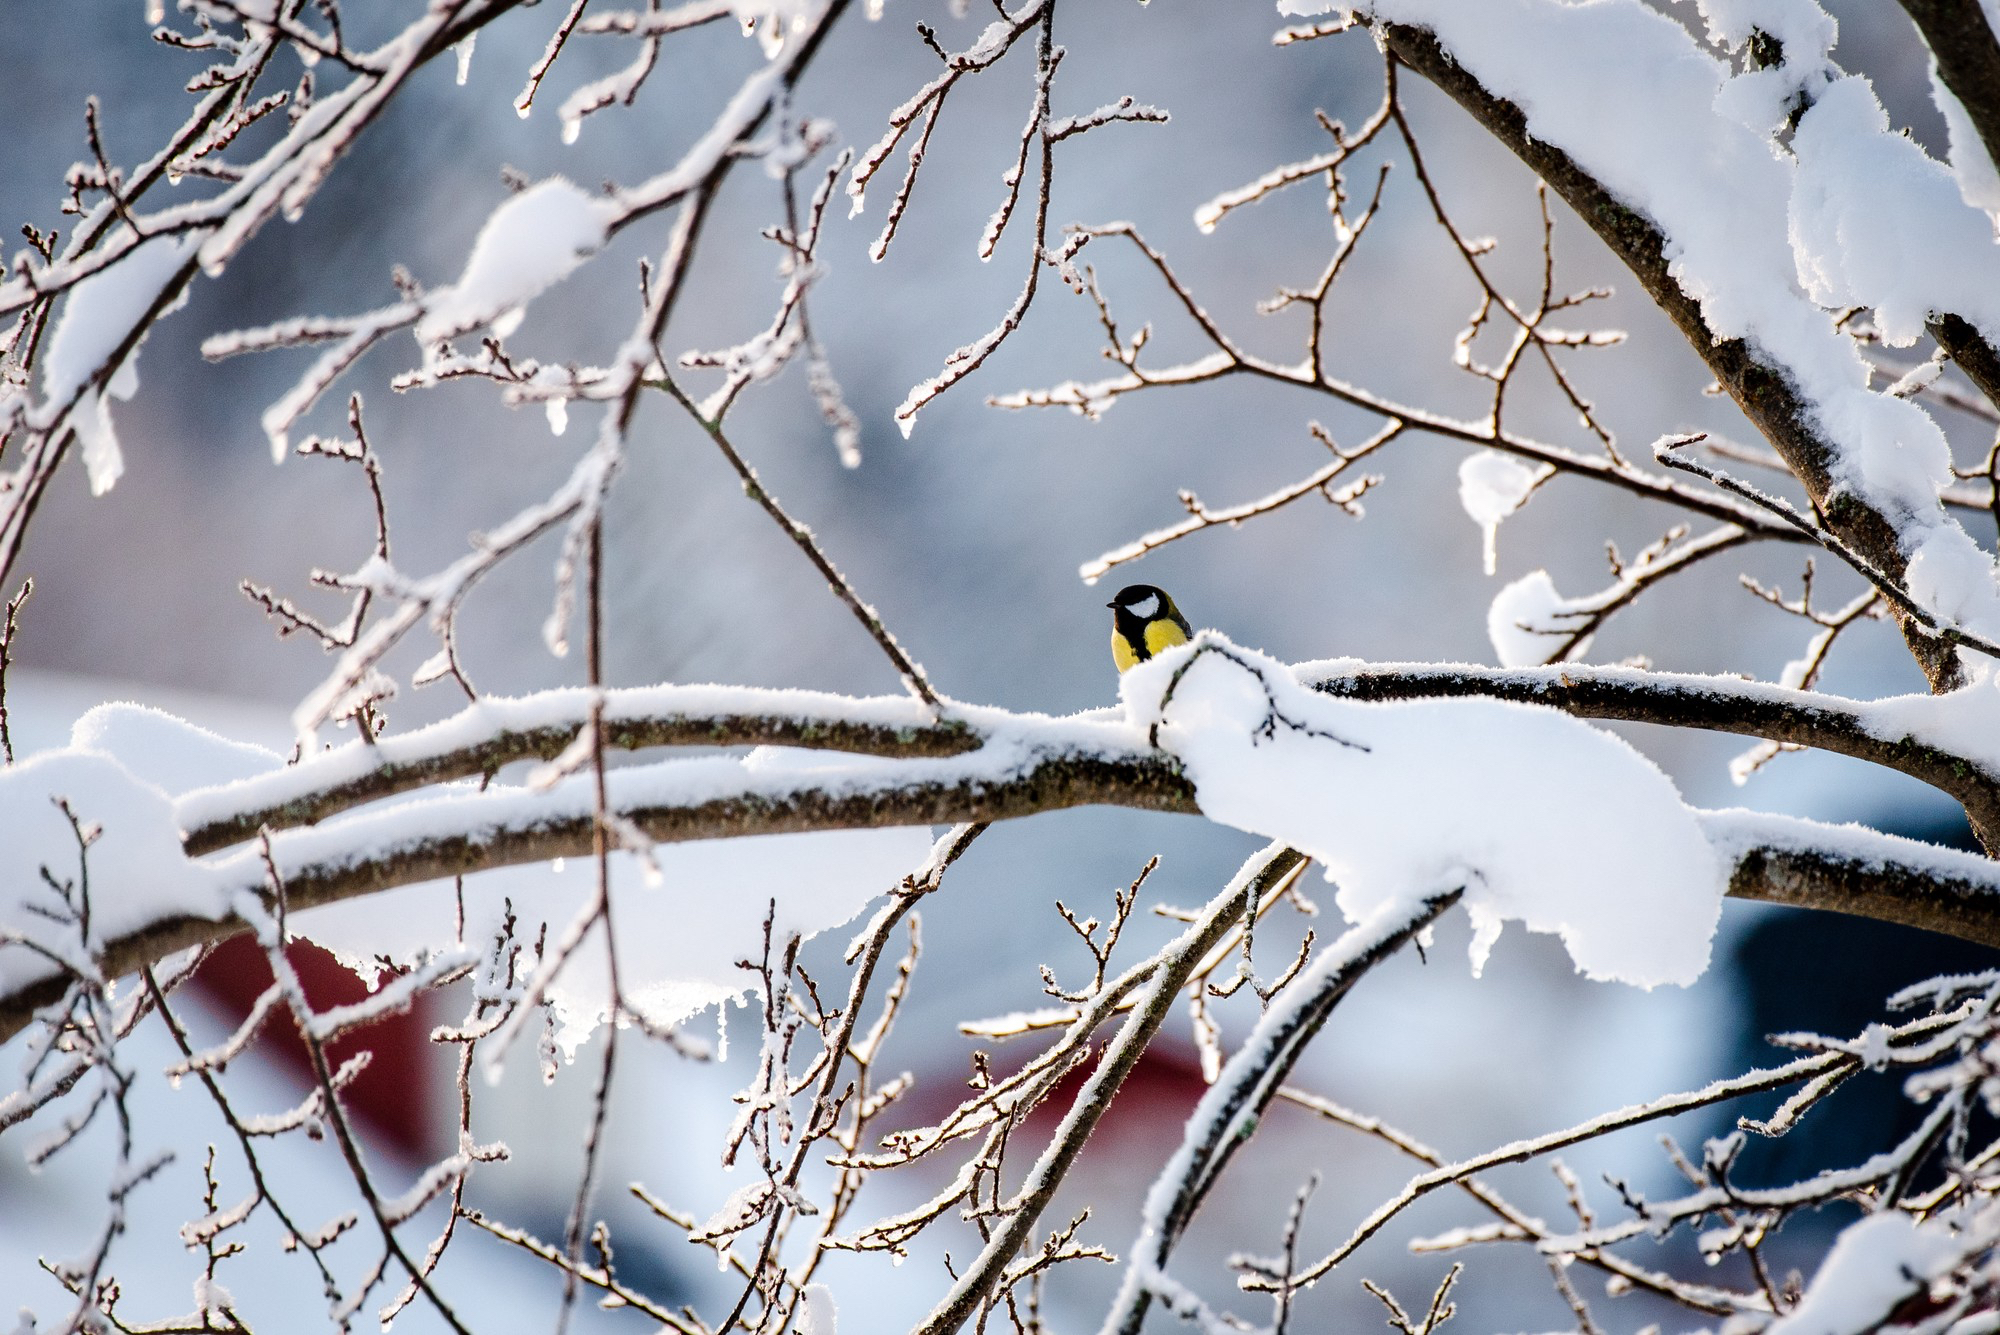 small-great-tit-bird-on-the-branch-of-a-winter-tree.jpg